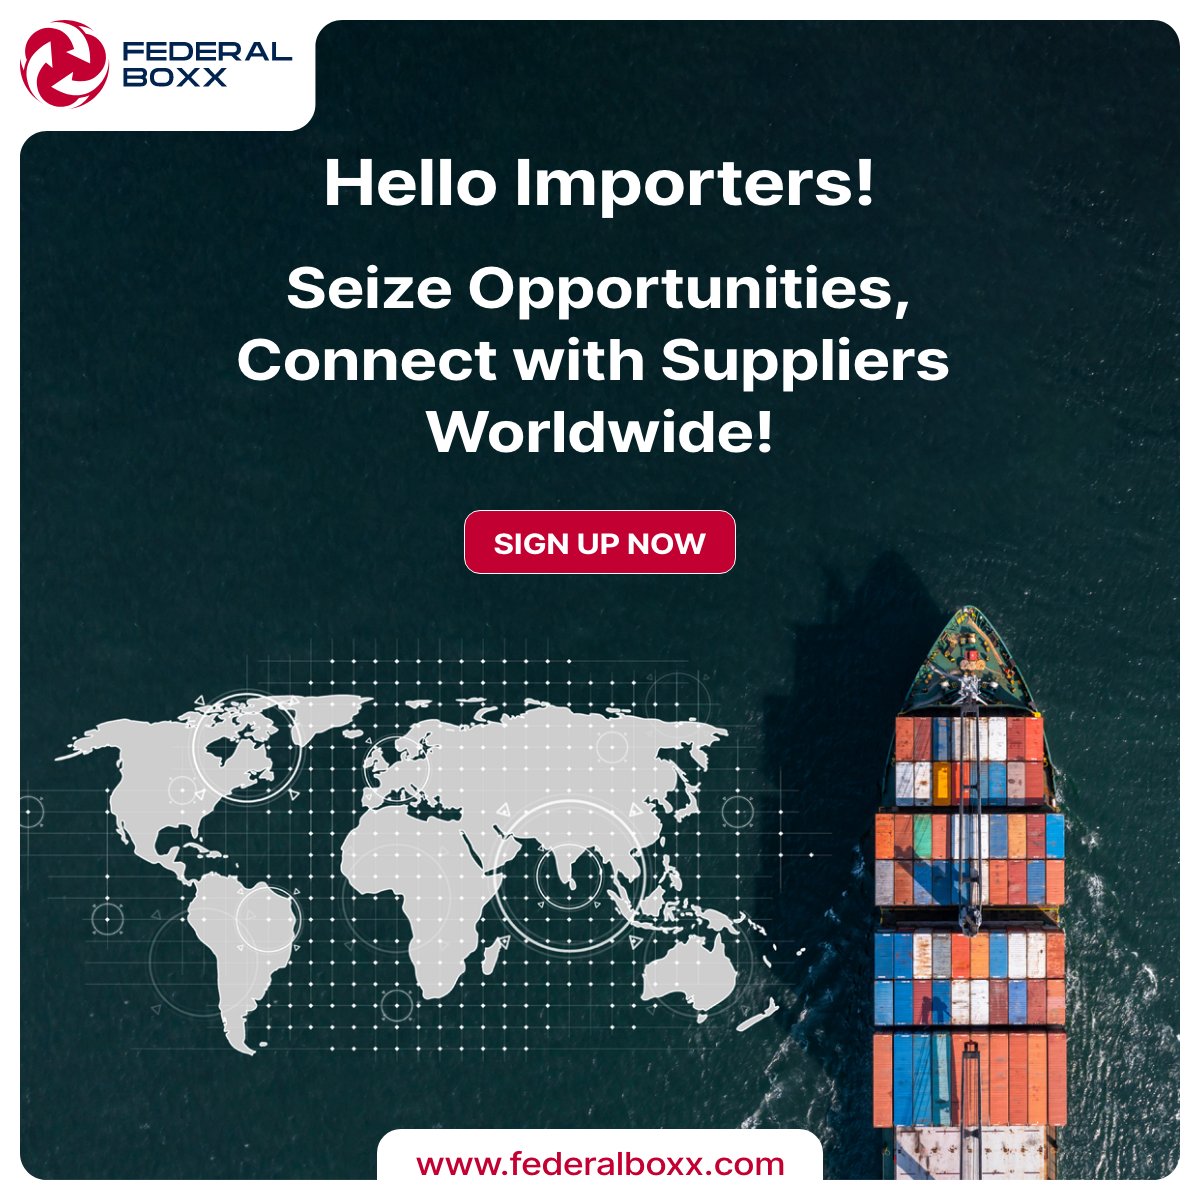 Attention Importers!  Don't miss out on global opportunities! Connect with suppliers worldwide on FederalBoxx and take your business to new heights! Sign up now and expand your network. #Importers #GlobalTrade #BusinessGrowth #SupplyChain #Importing